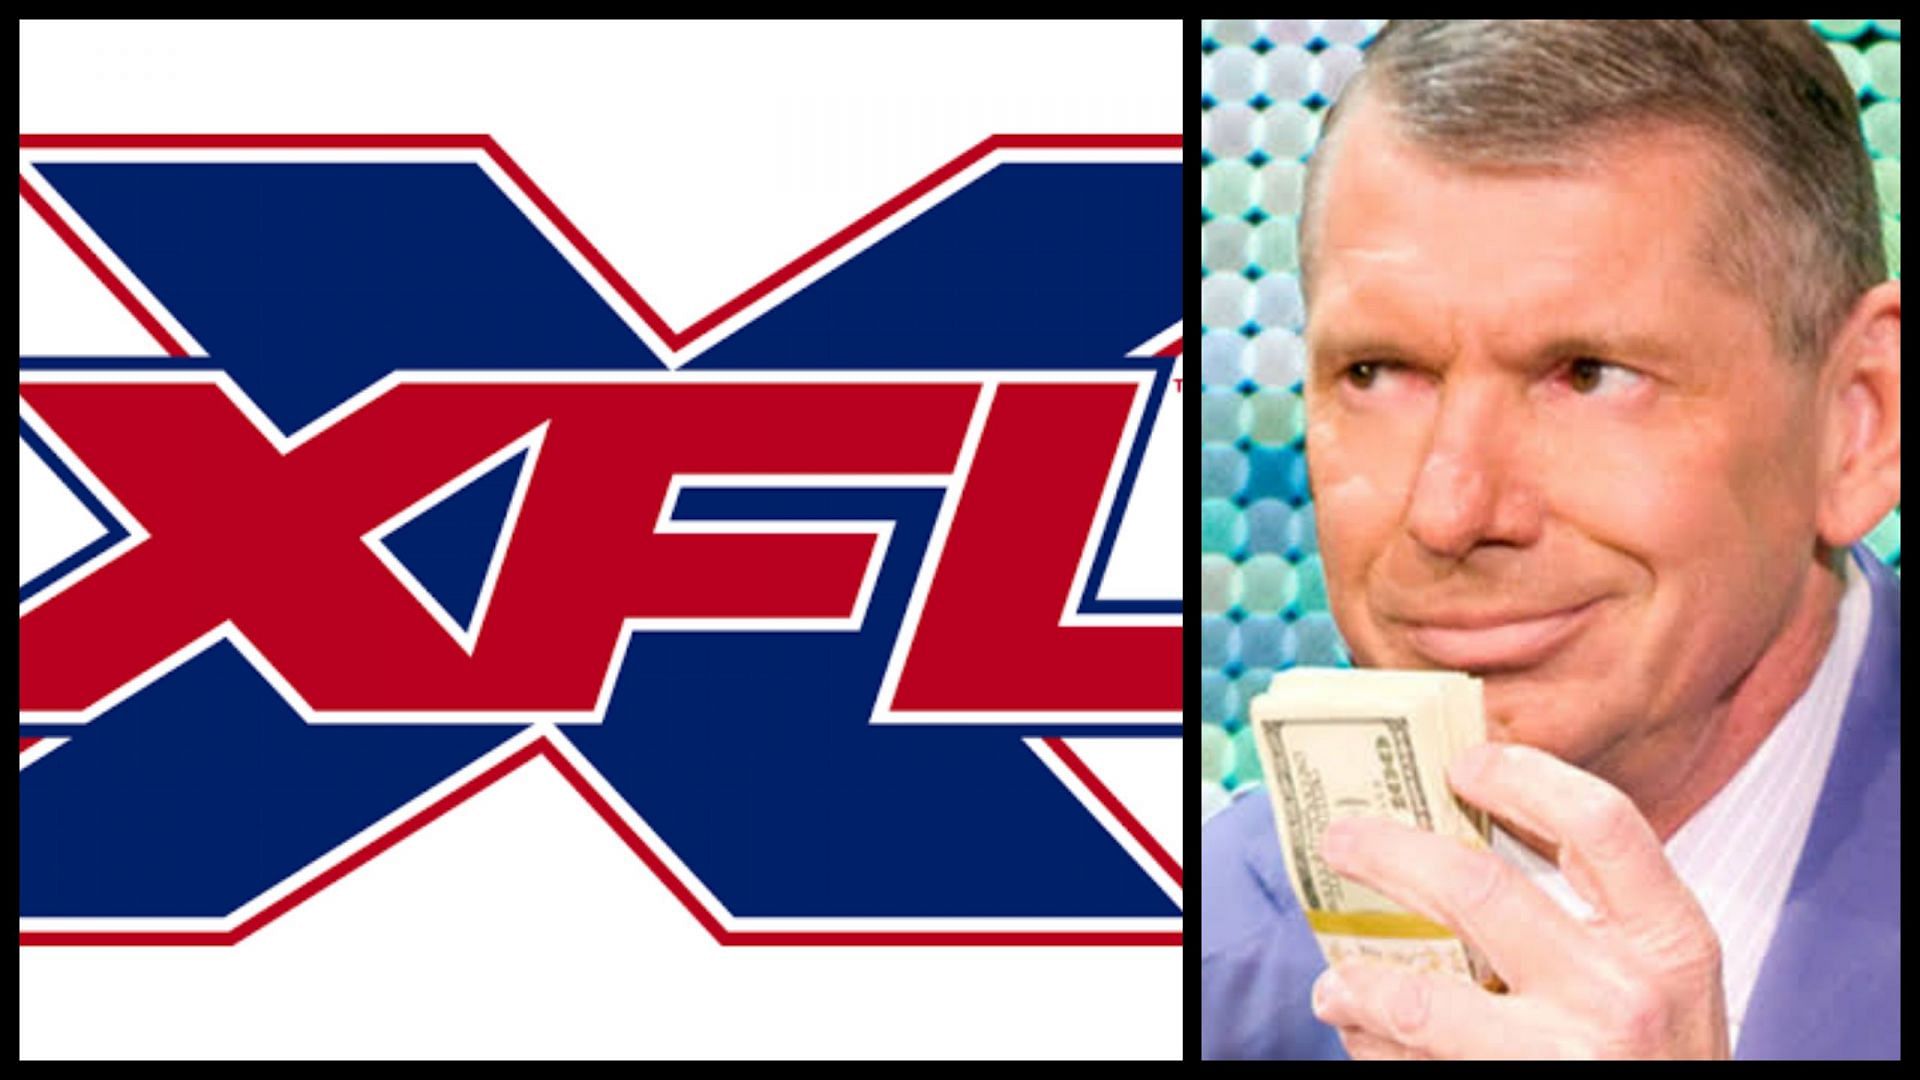 How much did Vince McMahon invest in XFL?